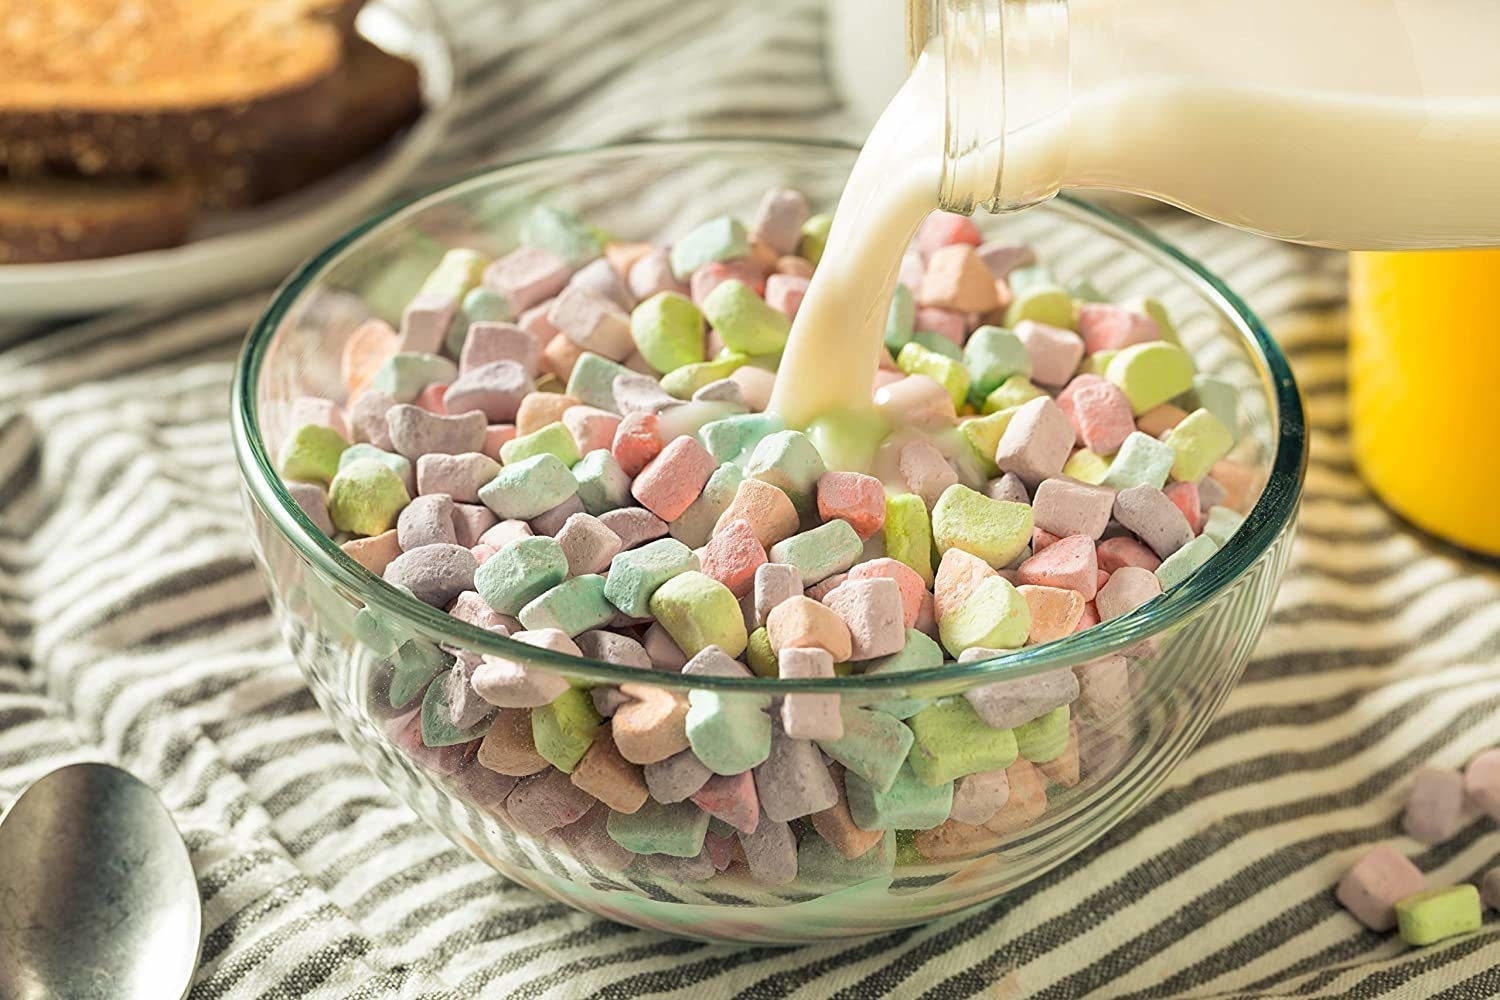 milk being poured into bowl of marshmallows